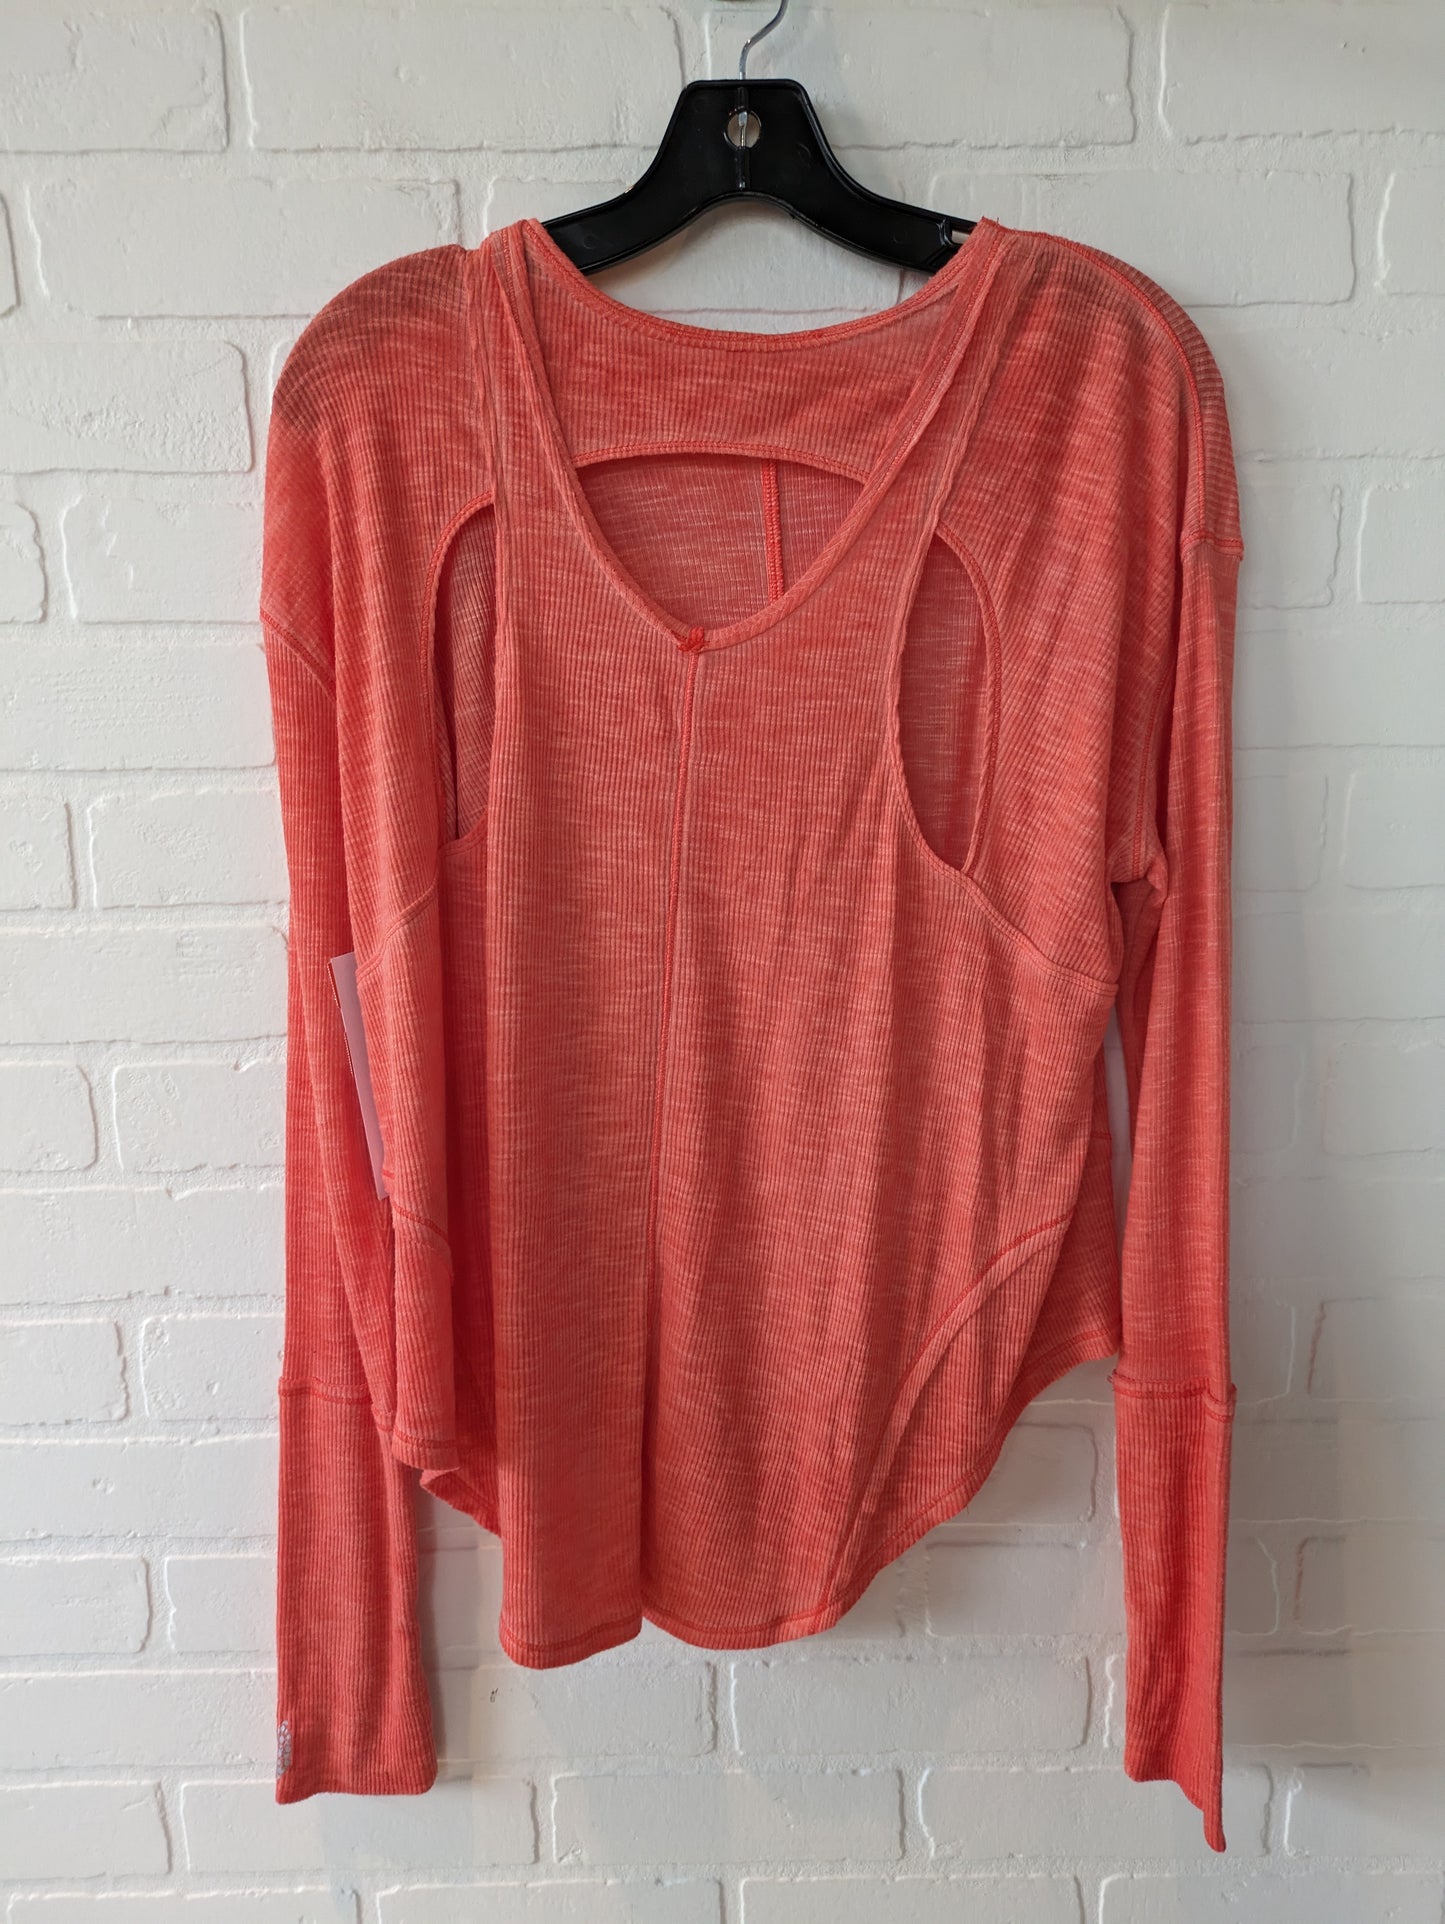 Athletic Top Long Sleeve Crewneck By Free People  Size: S